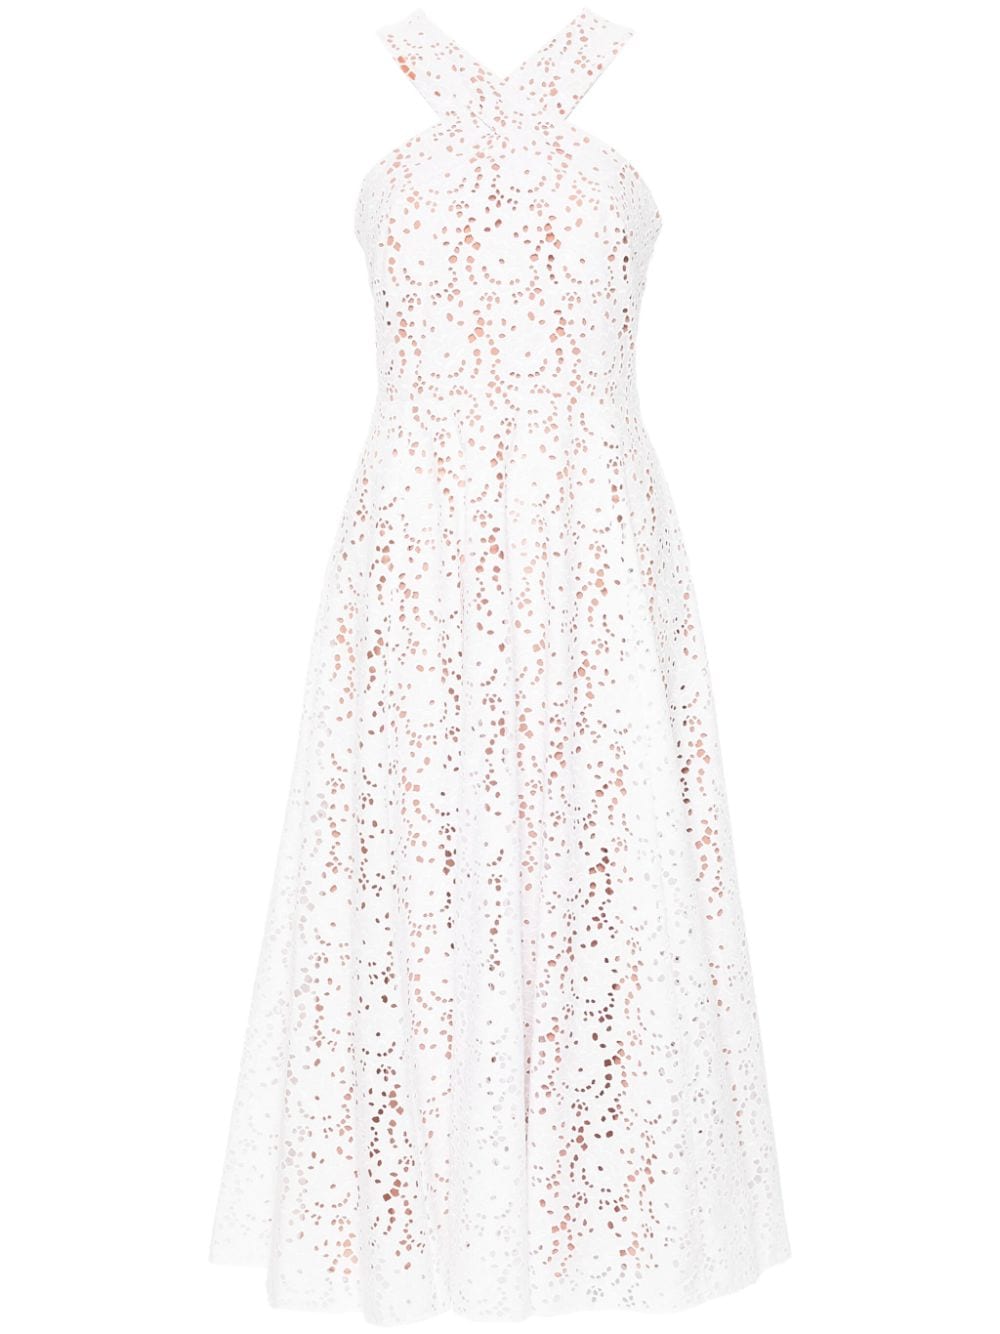 Michael Kors Collection broderie-anglaise cotton dress - White von Michael Kors Collection